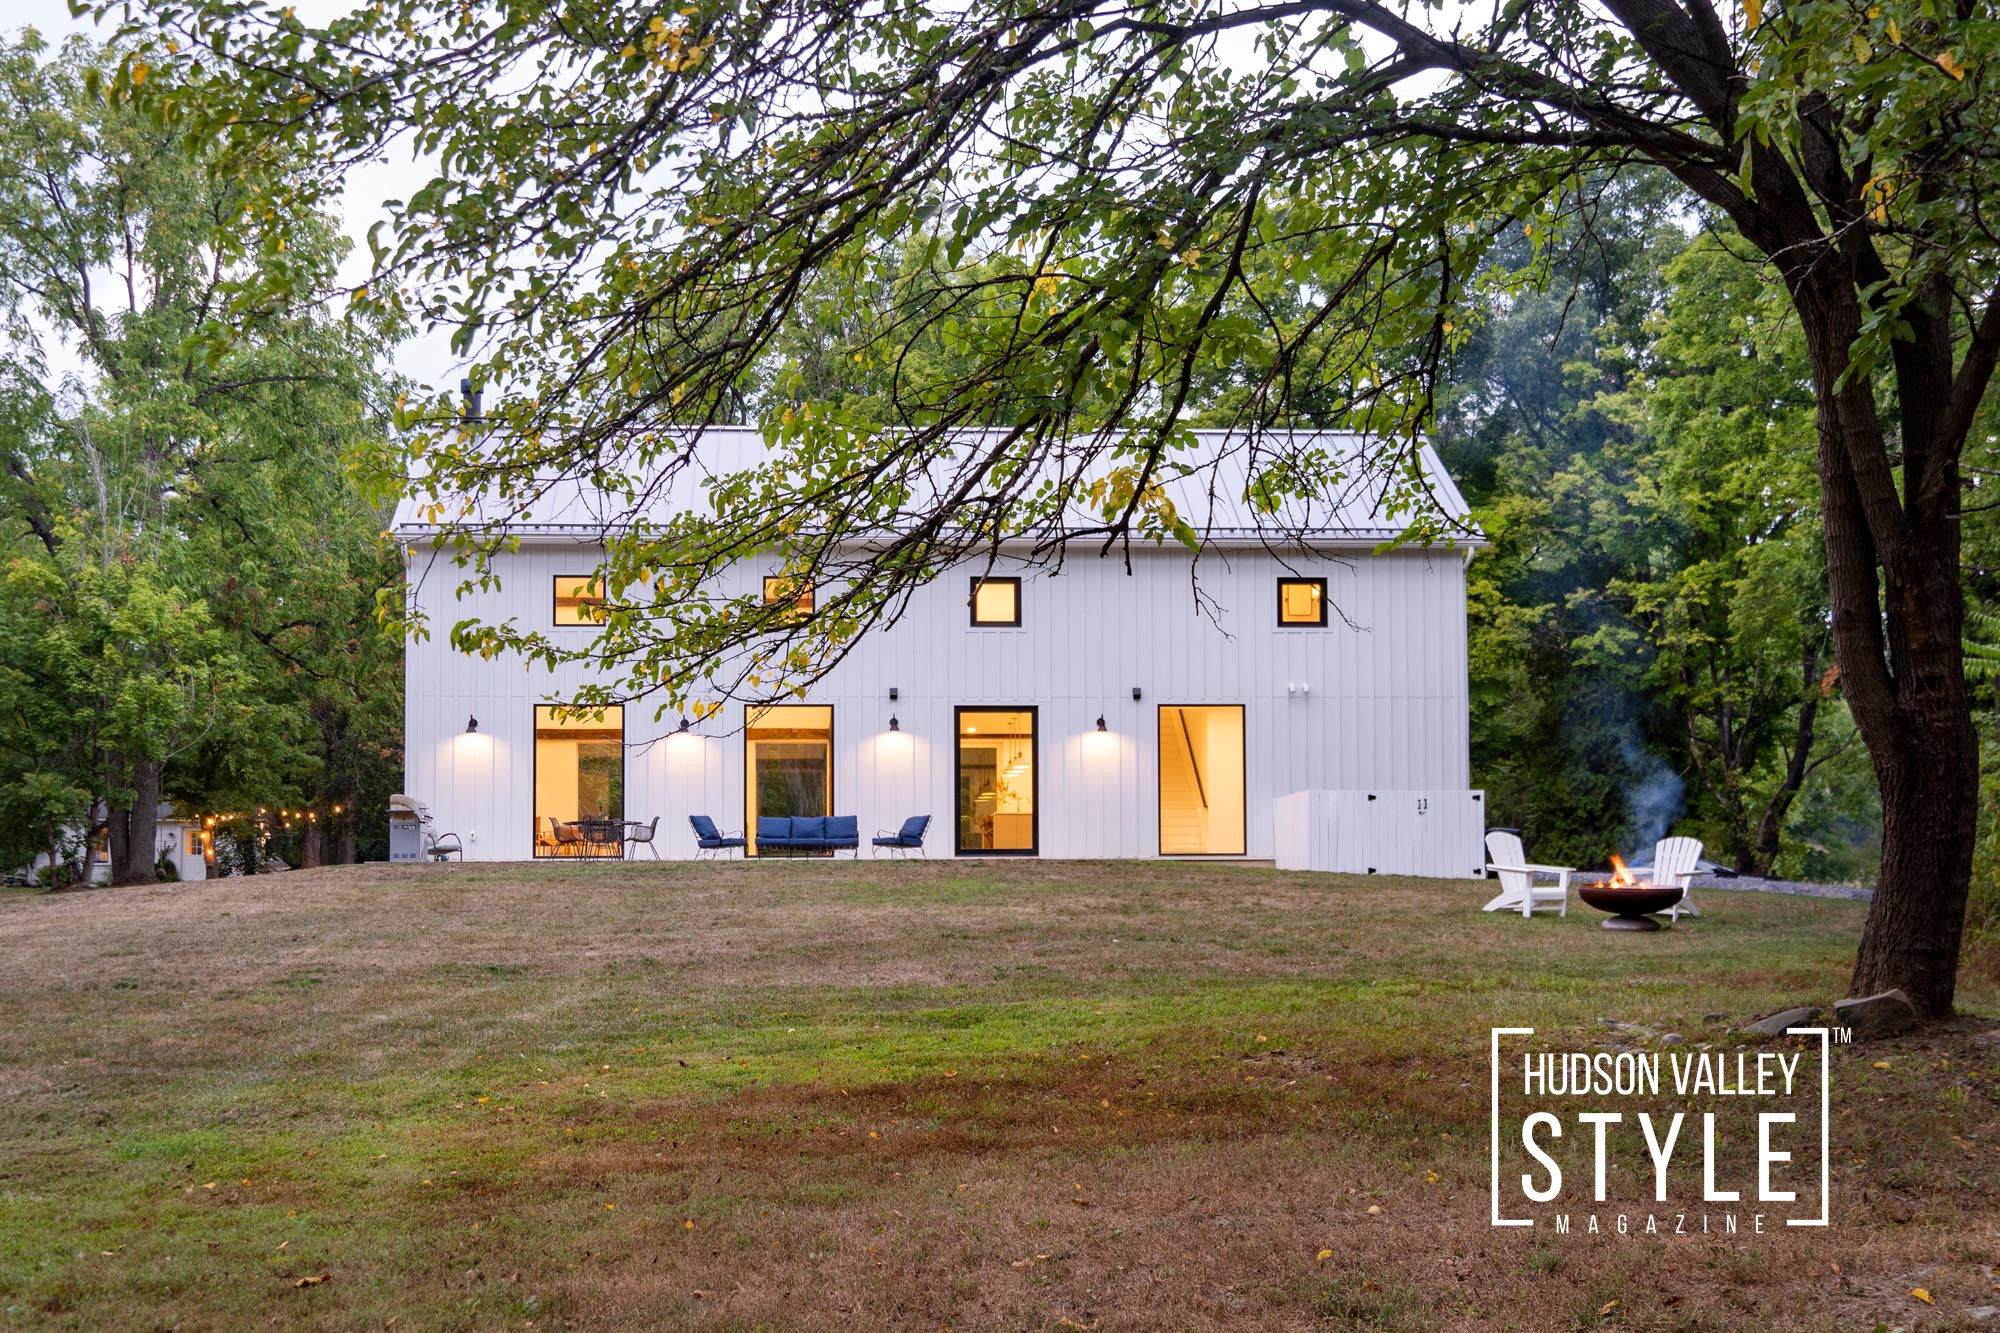 Airbnb Review of a Converted Barn Overlooking Apsley Hill Farm – Hudson Valley Airbnb Reviews with Photographer Maxwell Alexander